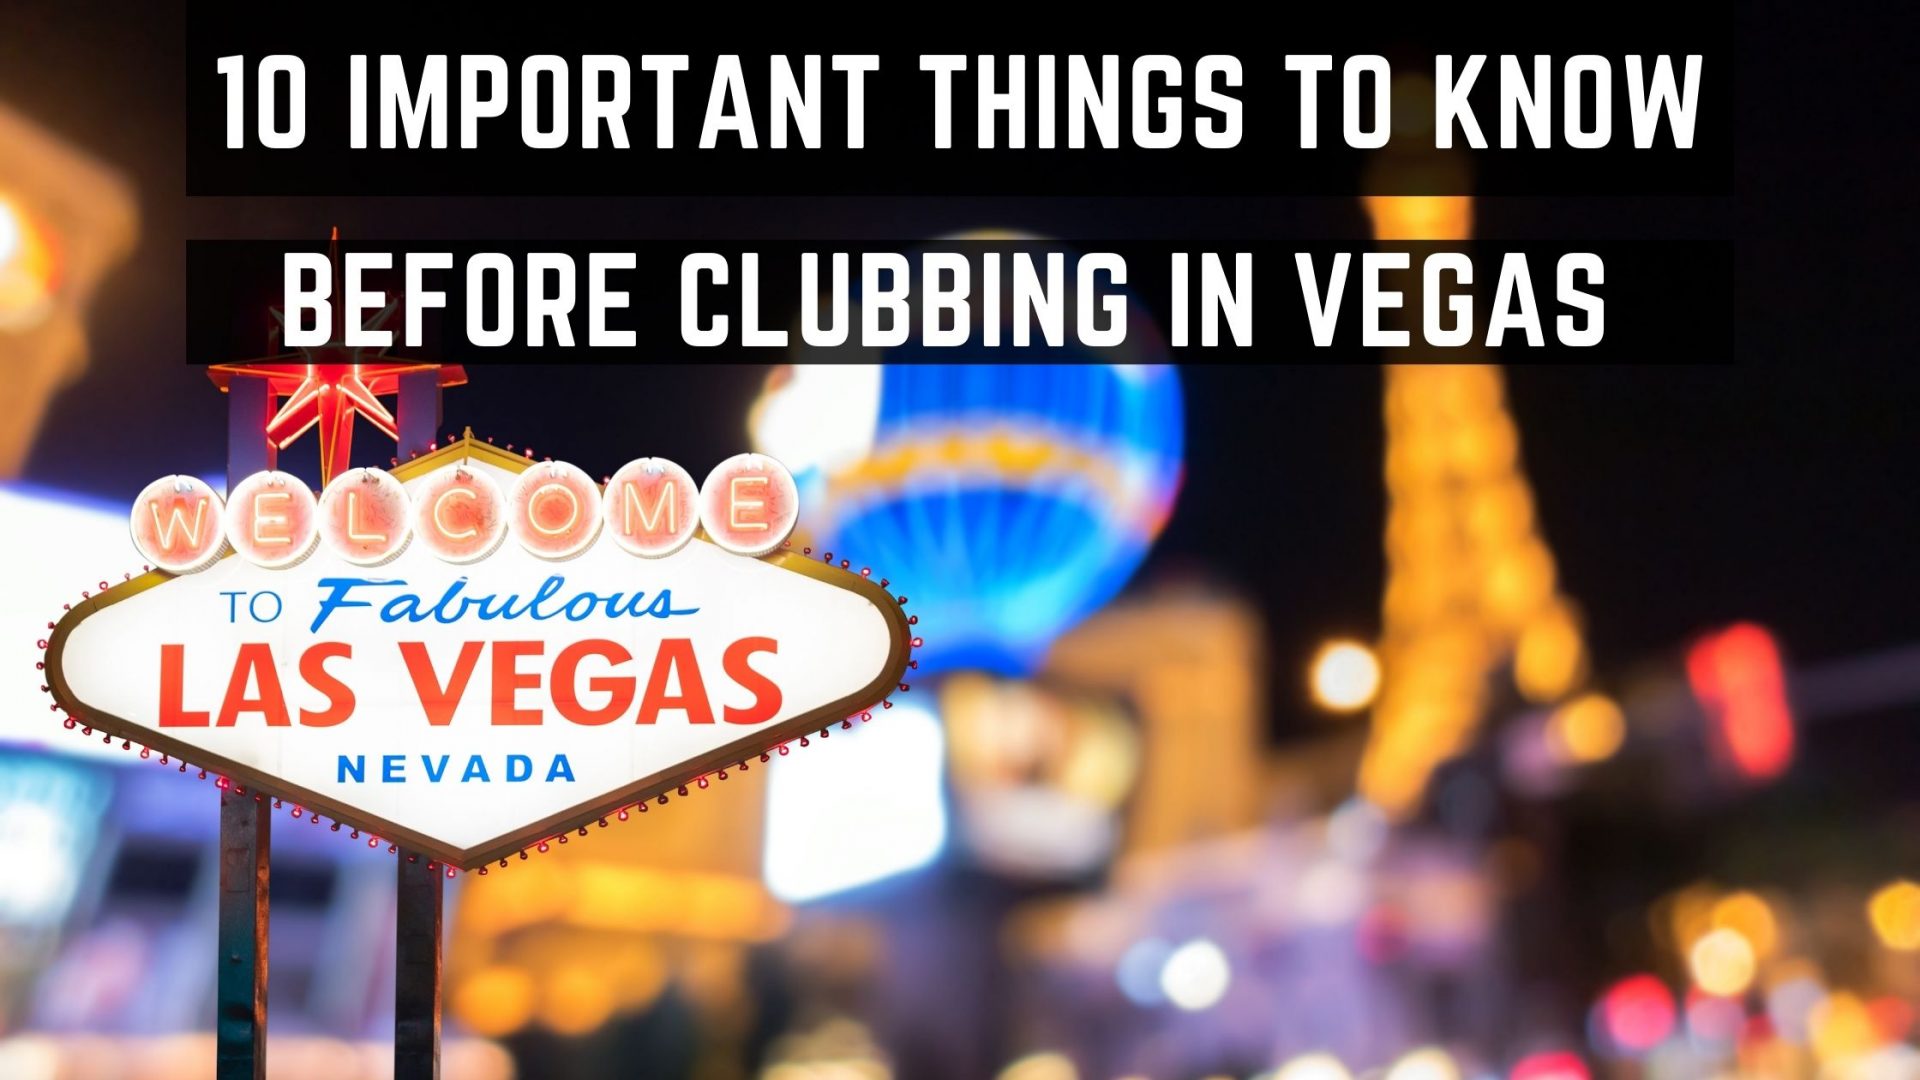 10 Important Things To Know Before Clubbing In Vegas